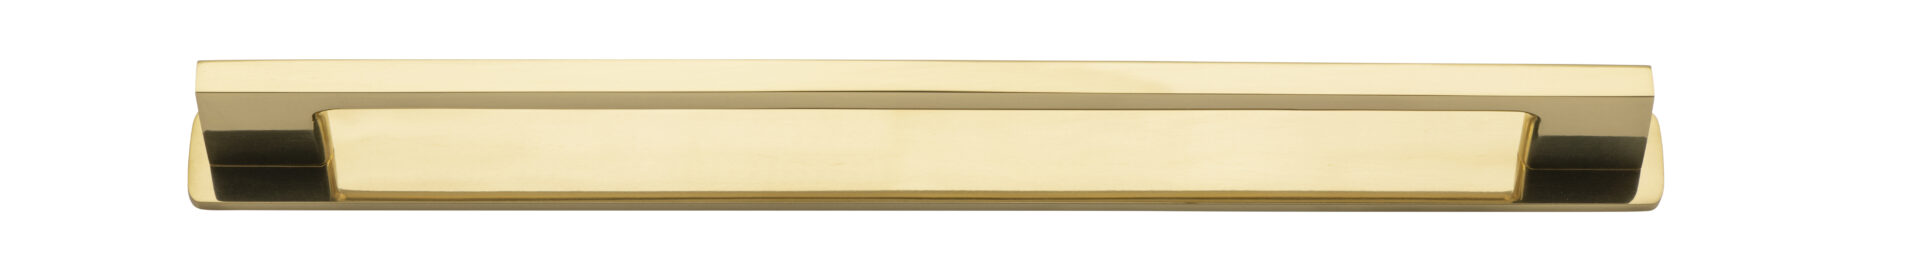 0517B - Cali Cabinet Pull with Backplate - CTC 256mm - Polished Brass